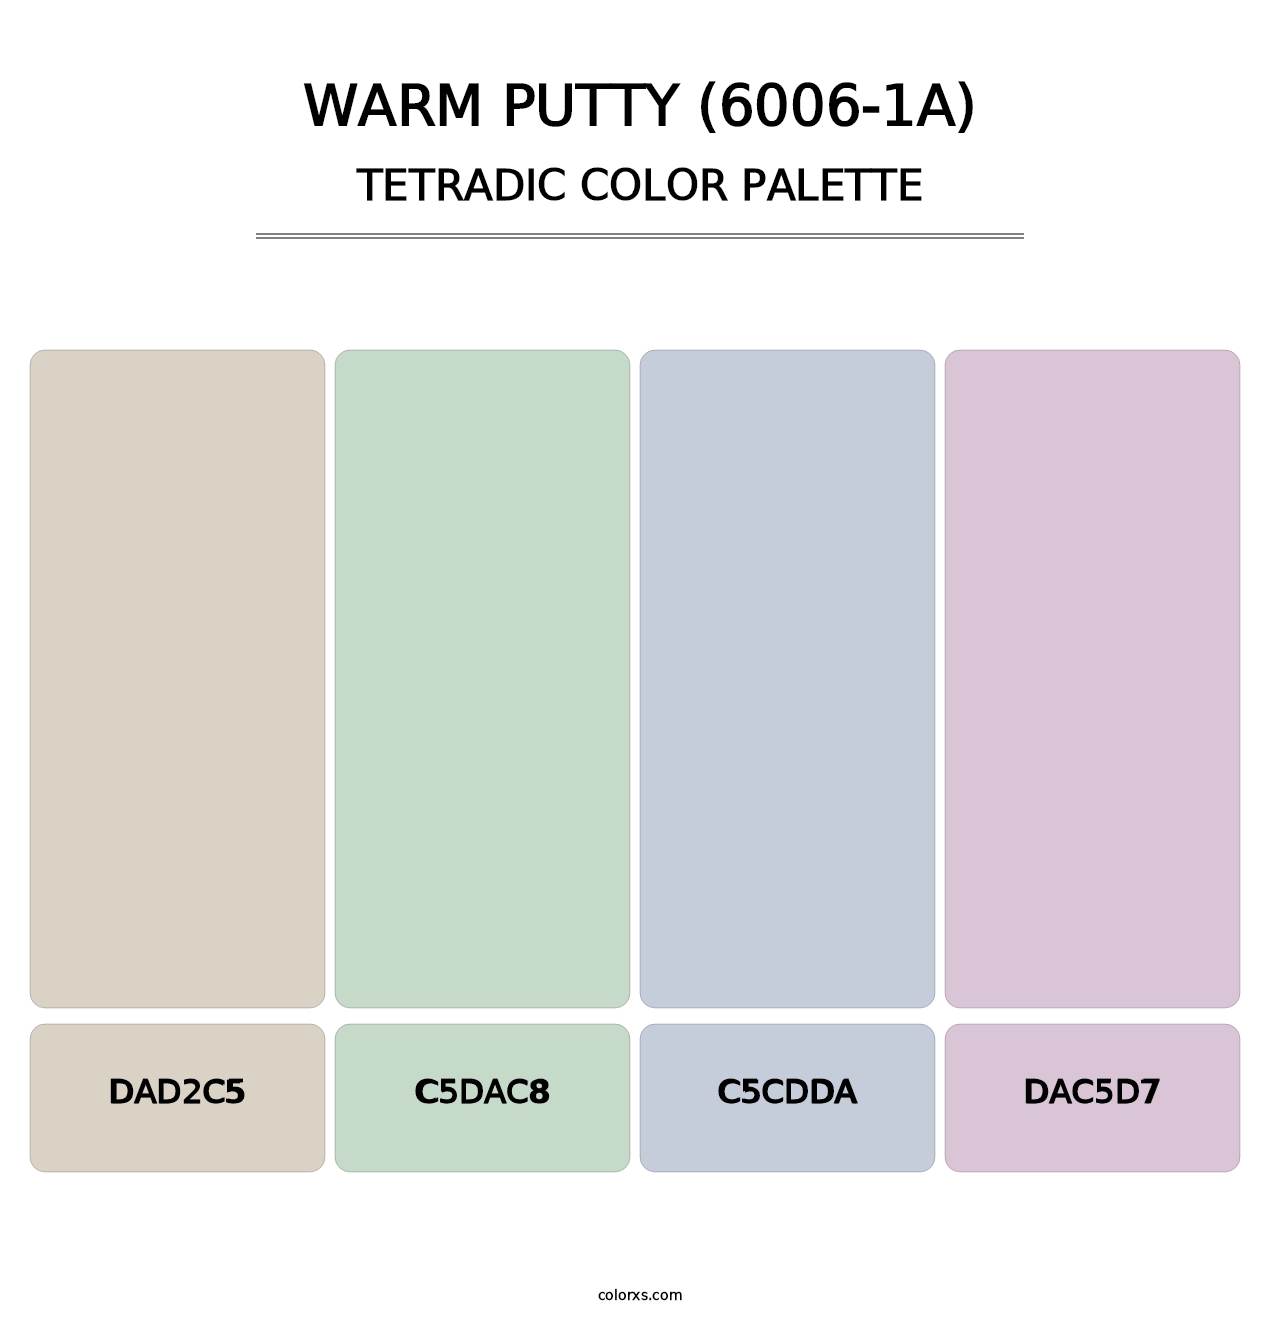 Warm Putty (6006-1A) - Tetradic Color Palette